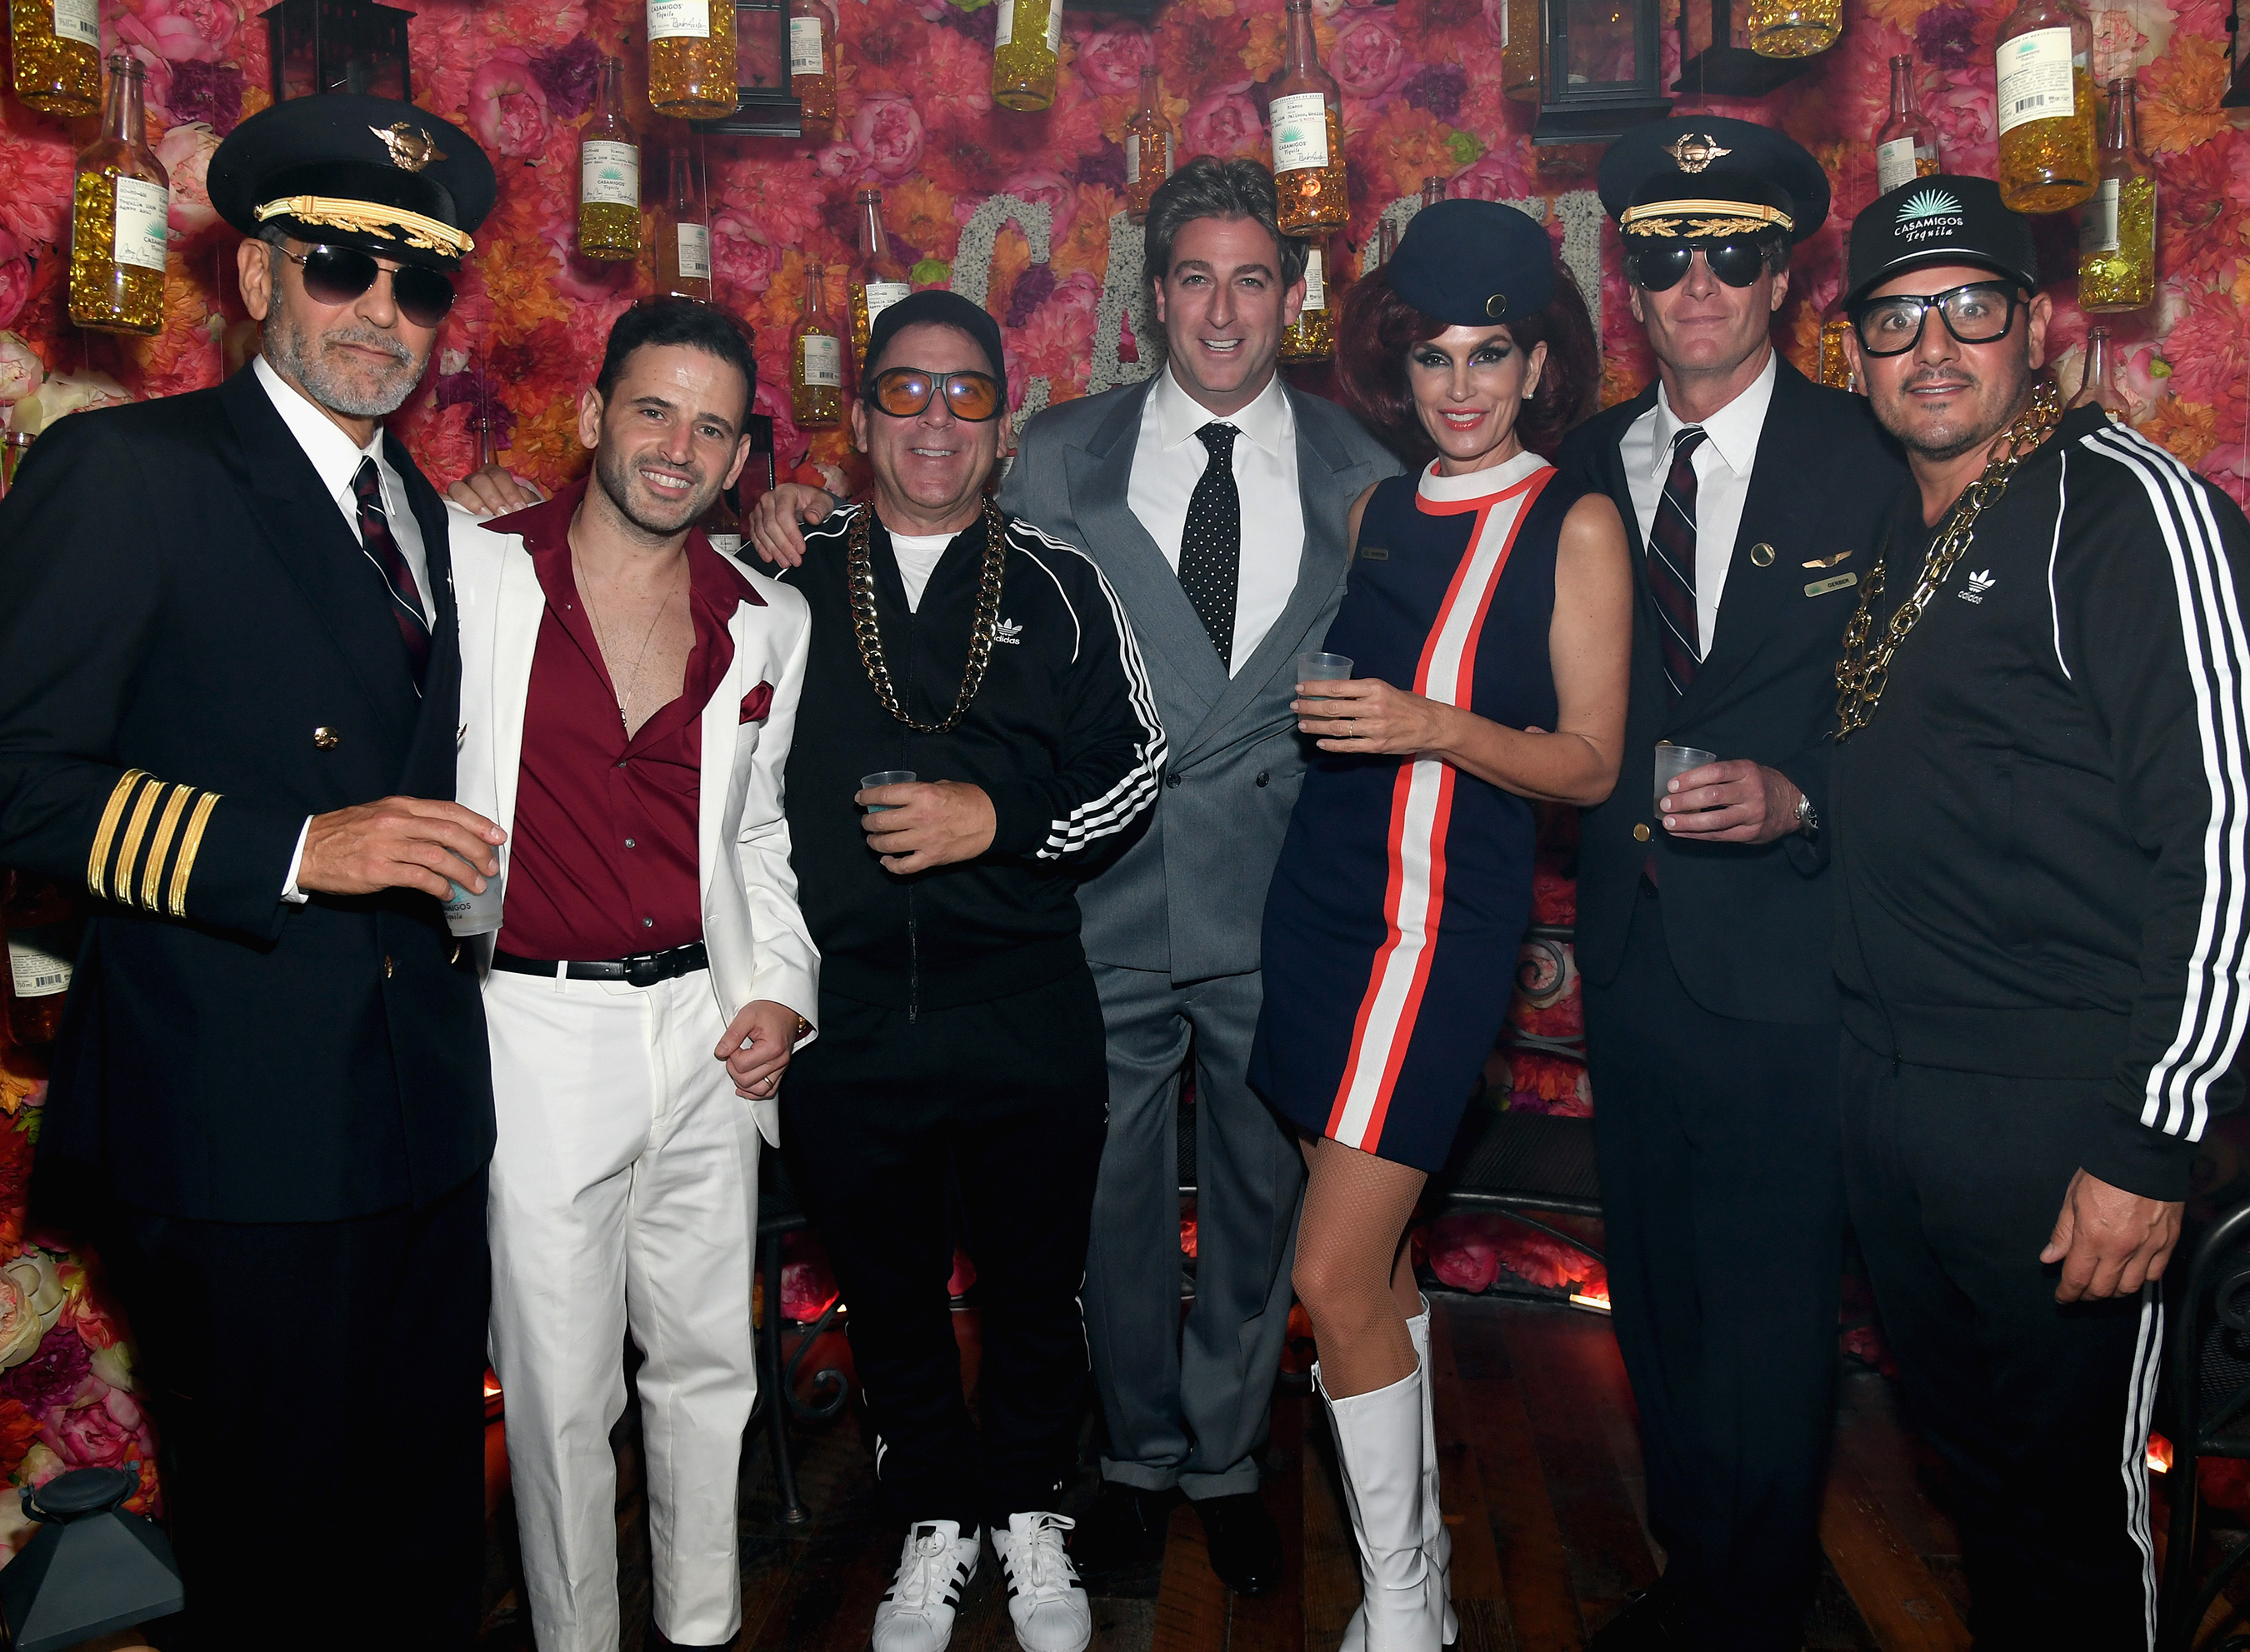 CATCH Las Vegas Makes Waves With Star-Studded Debut At ARIA Resort & Casino